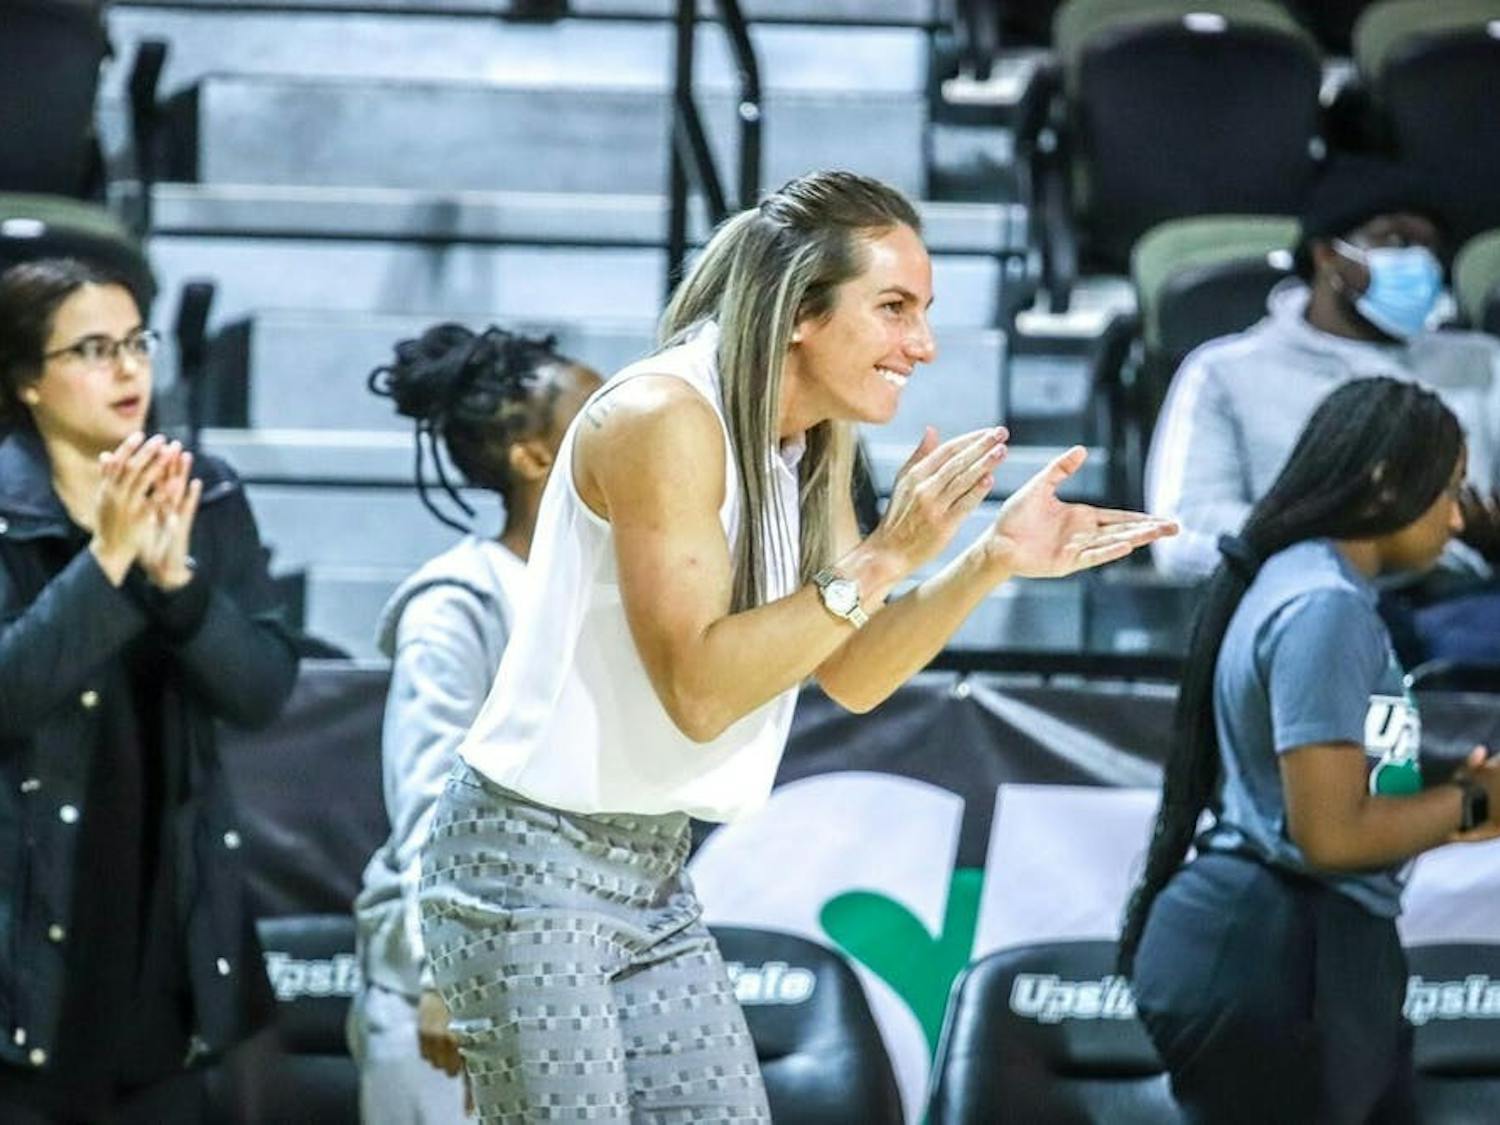 UB women's basketball head coach Becky Burke was hired prior to the season 2022-23, leading the Bulls to a 12-16 record in her first year.